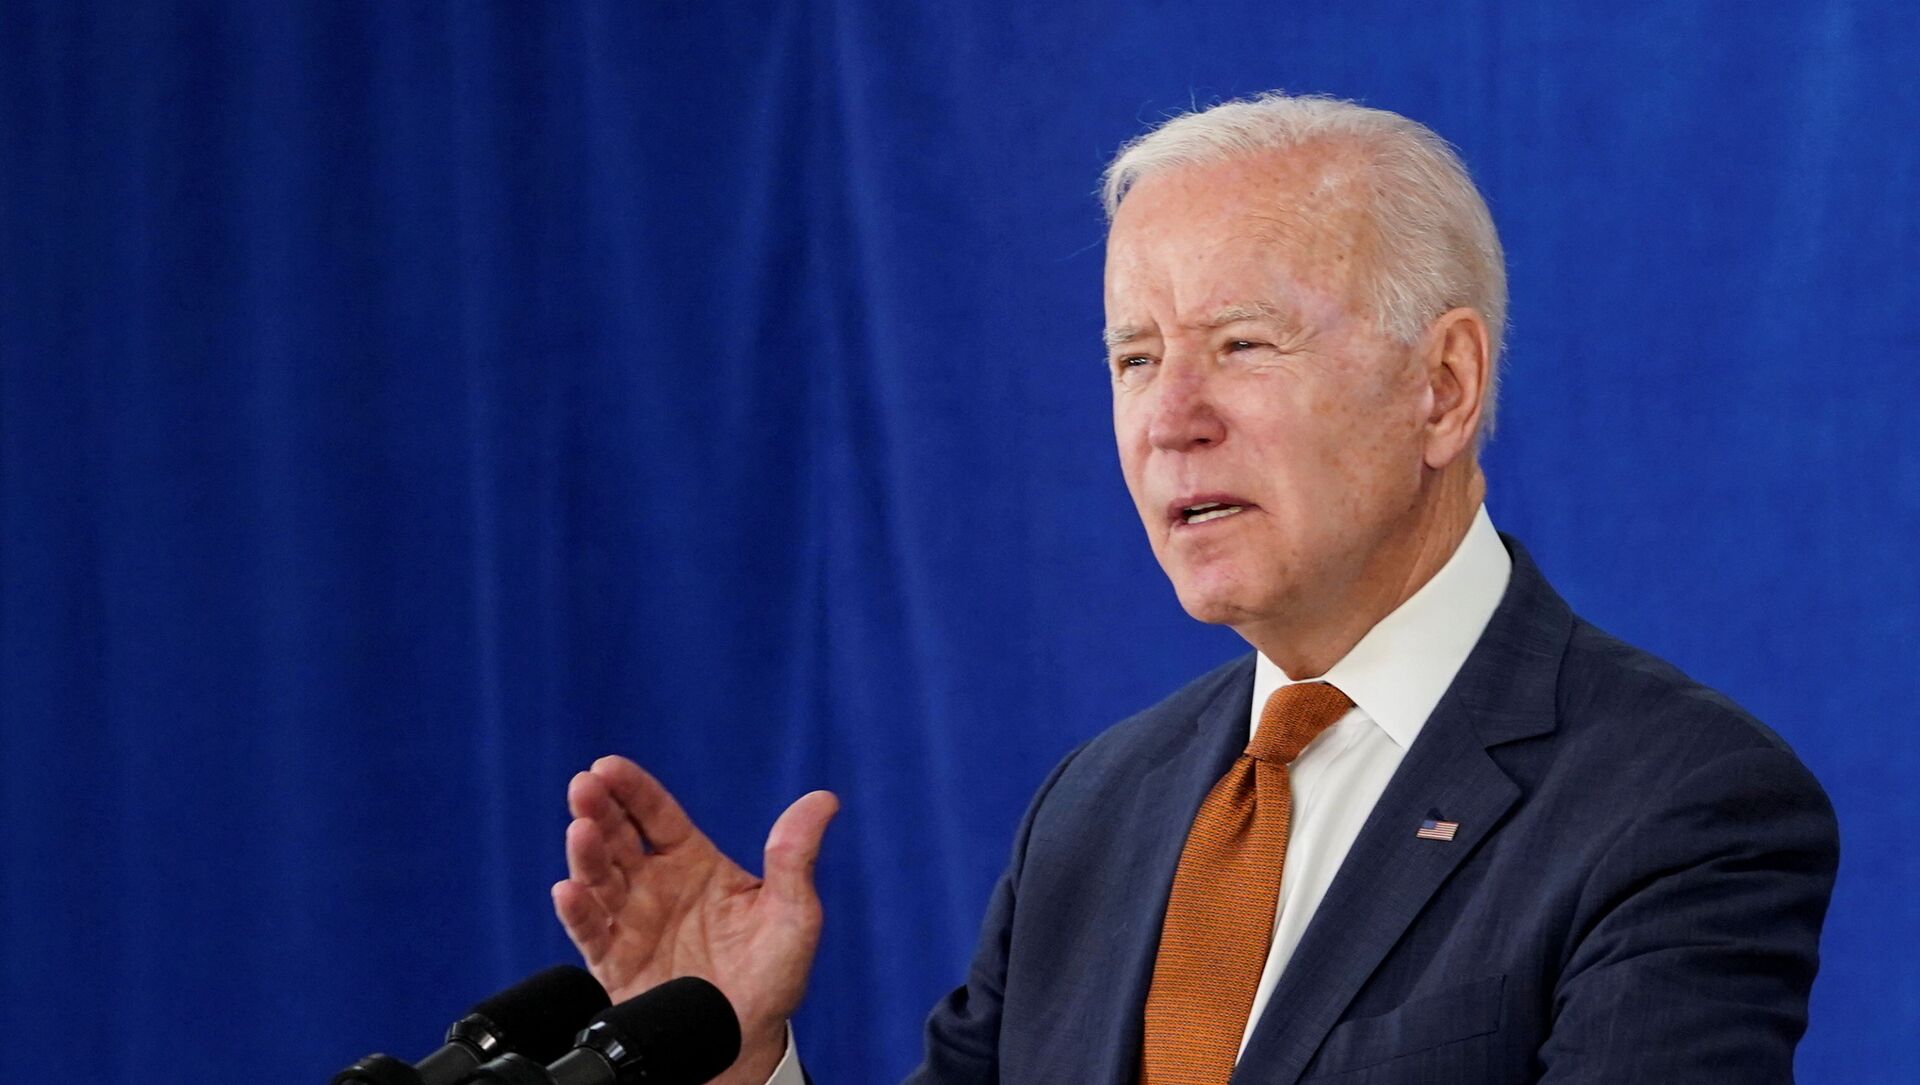 U.S. President Joe Biden delivers remarks on the May jobs report after U.S. employers boosted hiring amid the easing coronavirus disease (COVID-19) pandemic, at the Rehoboth Beach Convention Center in Rehoboth Beach, Delaware, U.S., June 4, 2021 - Sputnik International, 1920, 09.06.2021